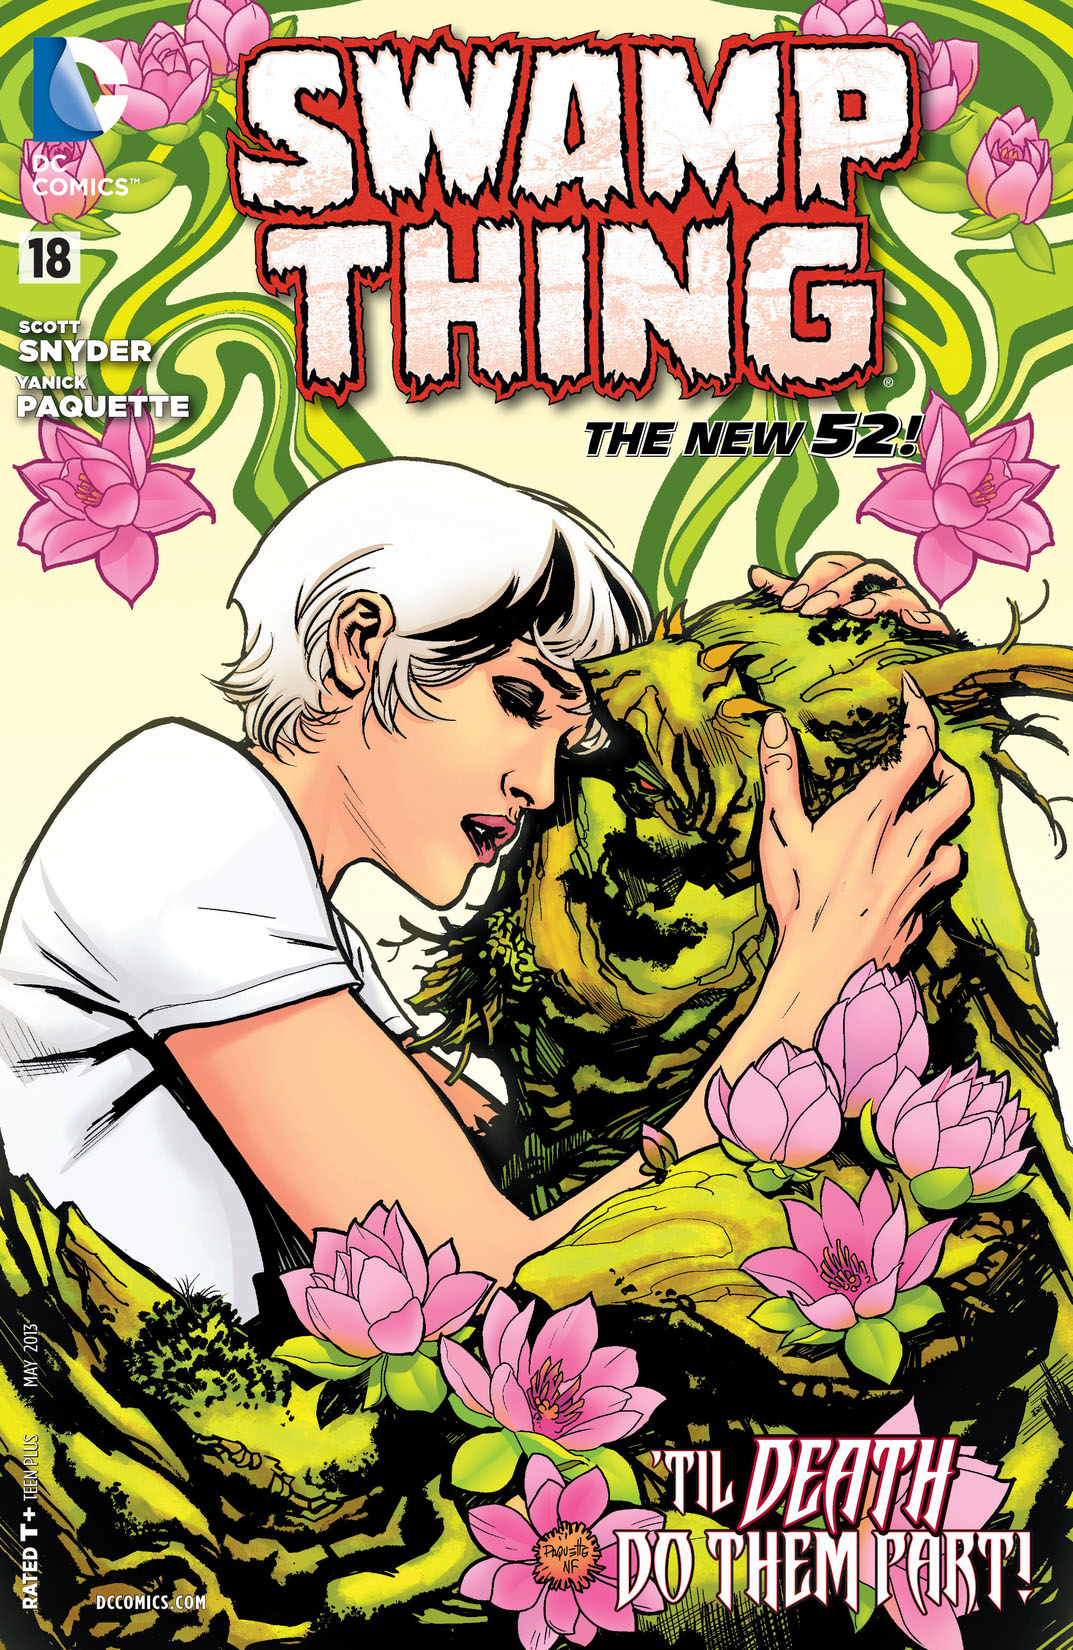 Swamp Thing (2011-) #18 preview images